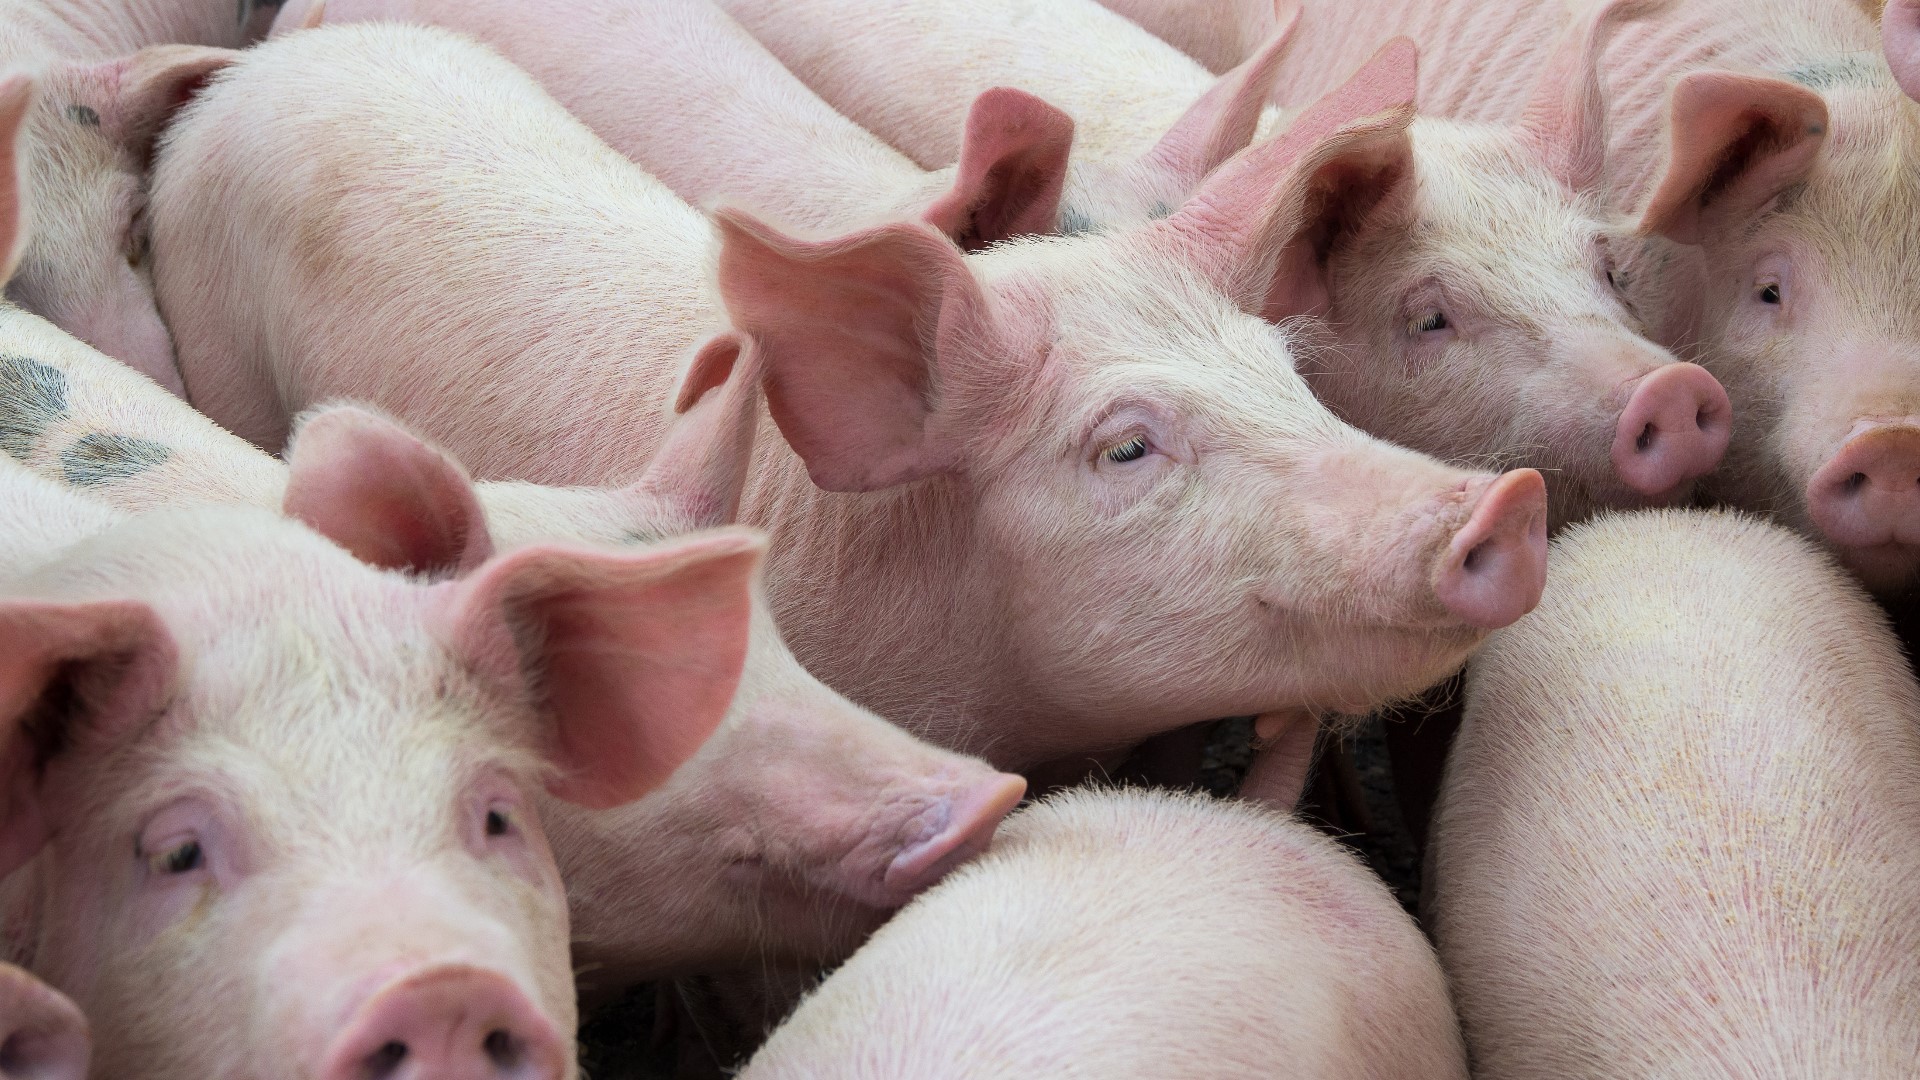 Premium Iowa Pork, based in Hospers, Iowa, bid $13 million to buy the slaughterhouse in Windom, which is the largest employer in the southwestern Minnesota town.